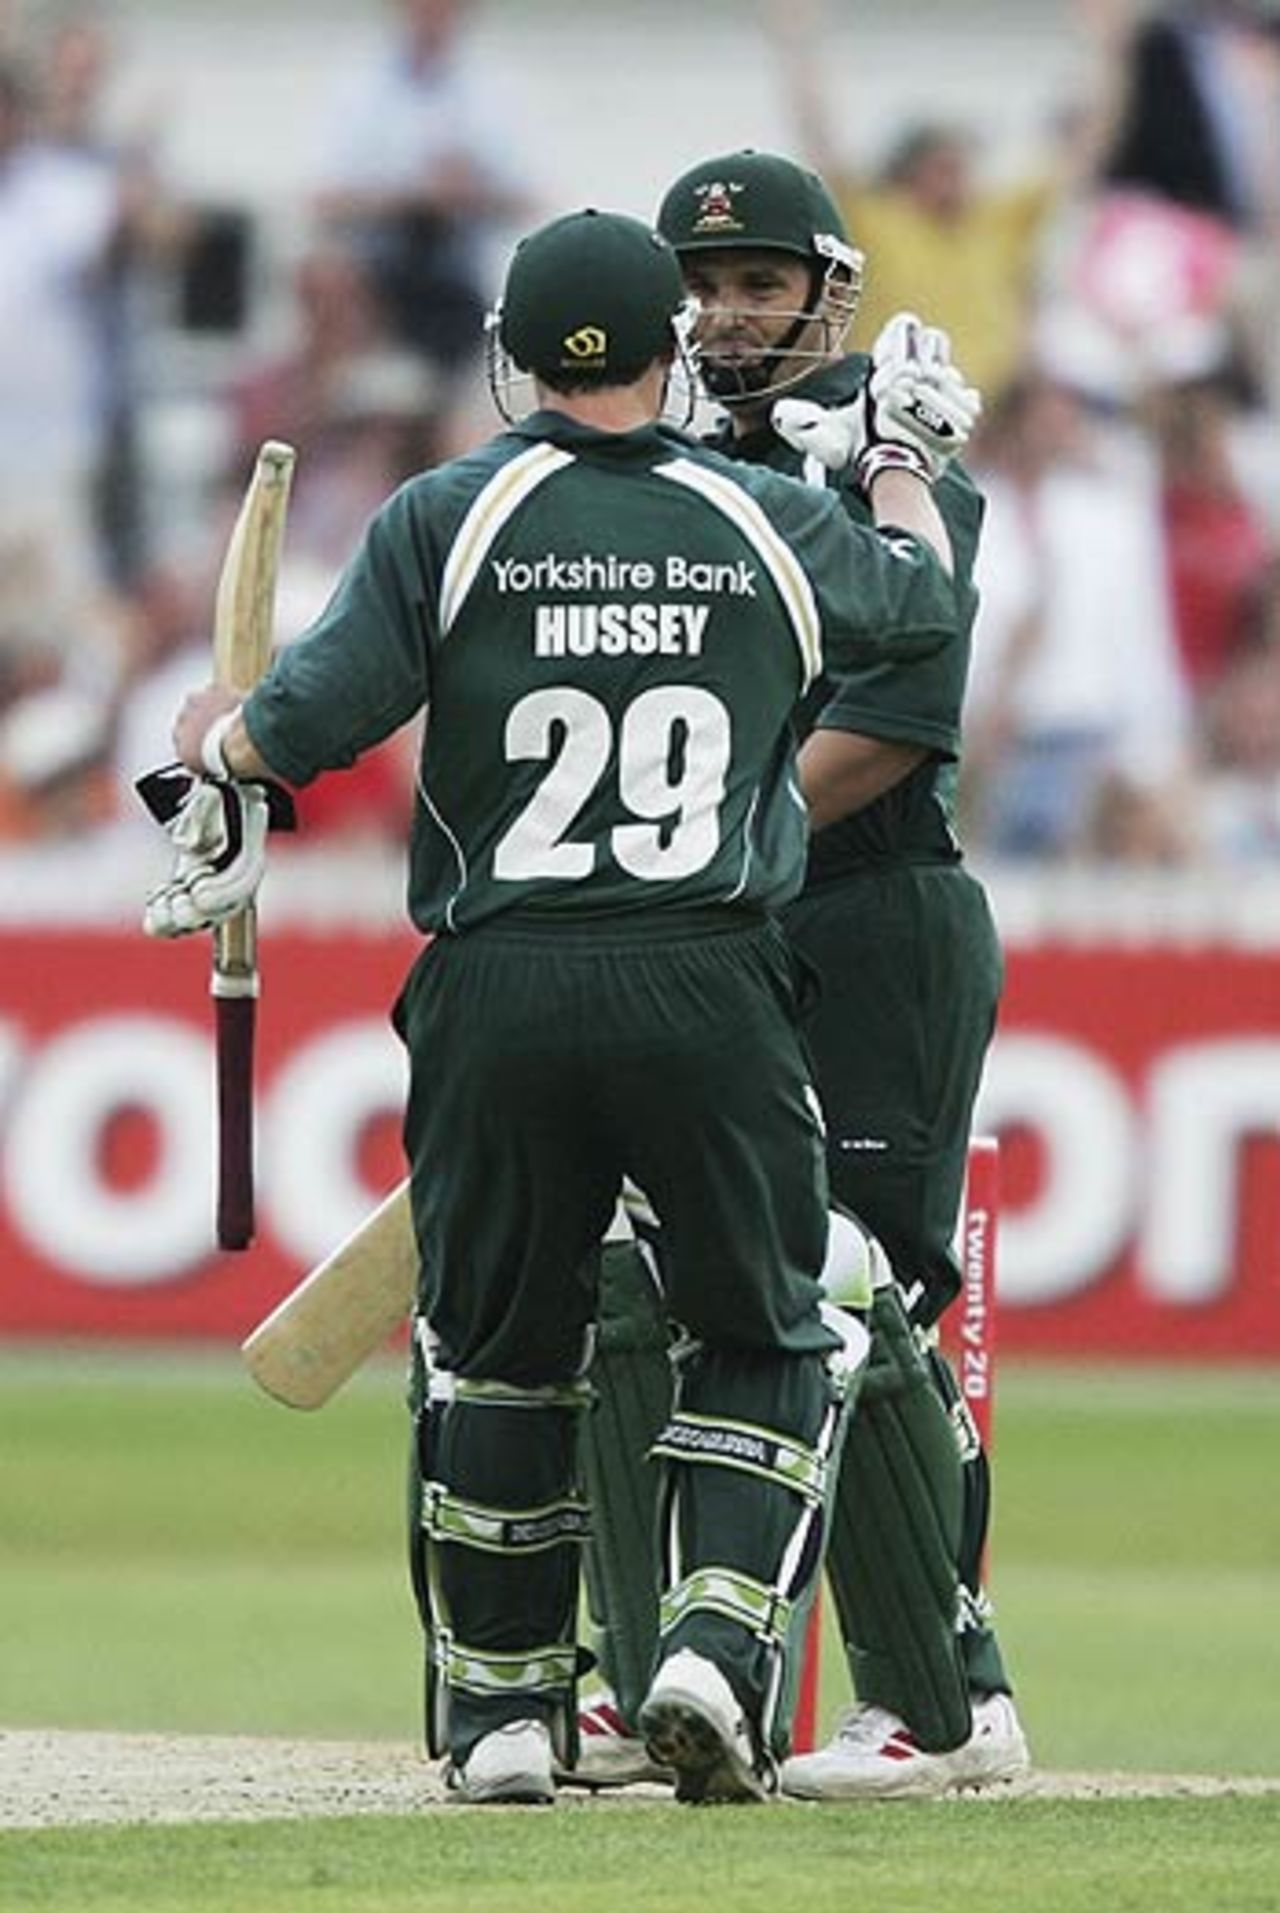 David Hussey and Mark Ealham took Notts to victory with 11 balls to spare, Nottingham v Leicestershire, Trent Bridge, July 4, 2006